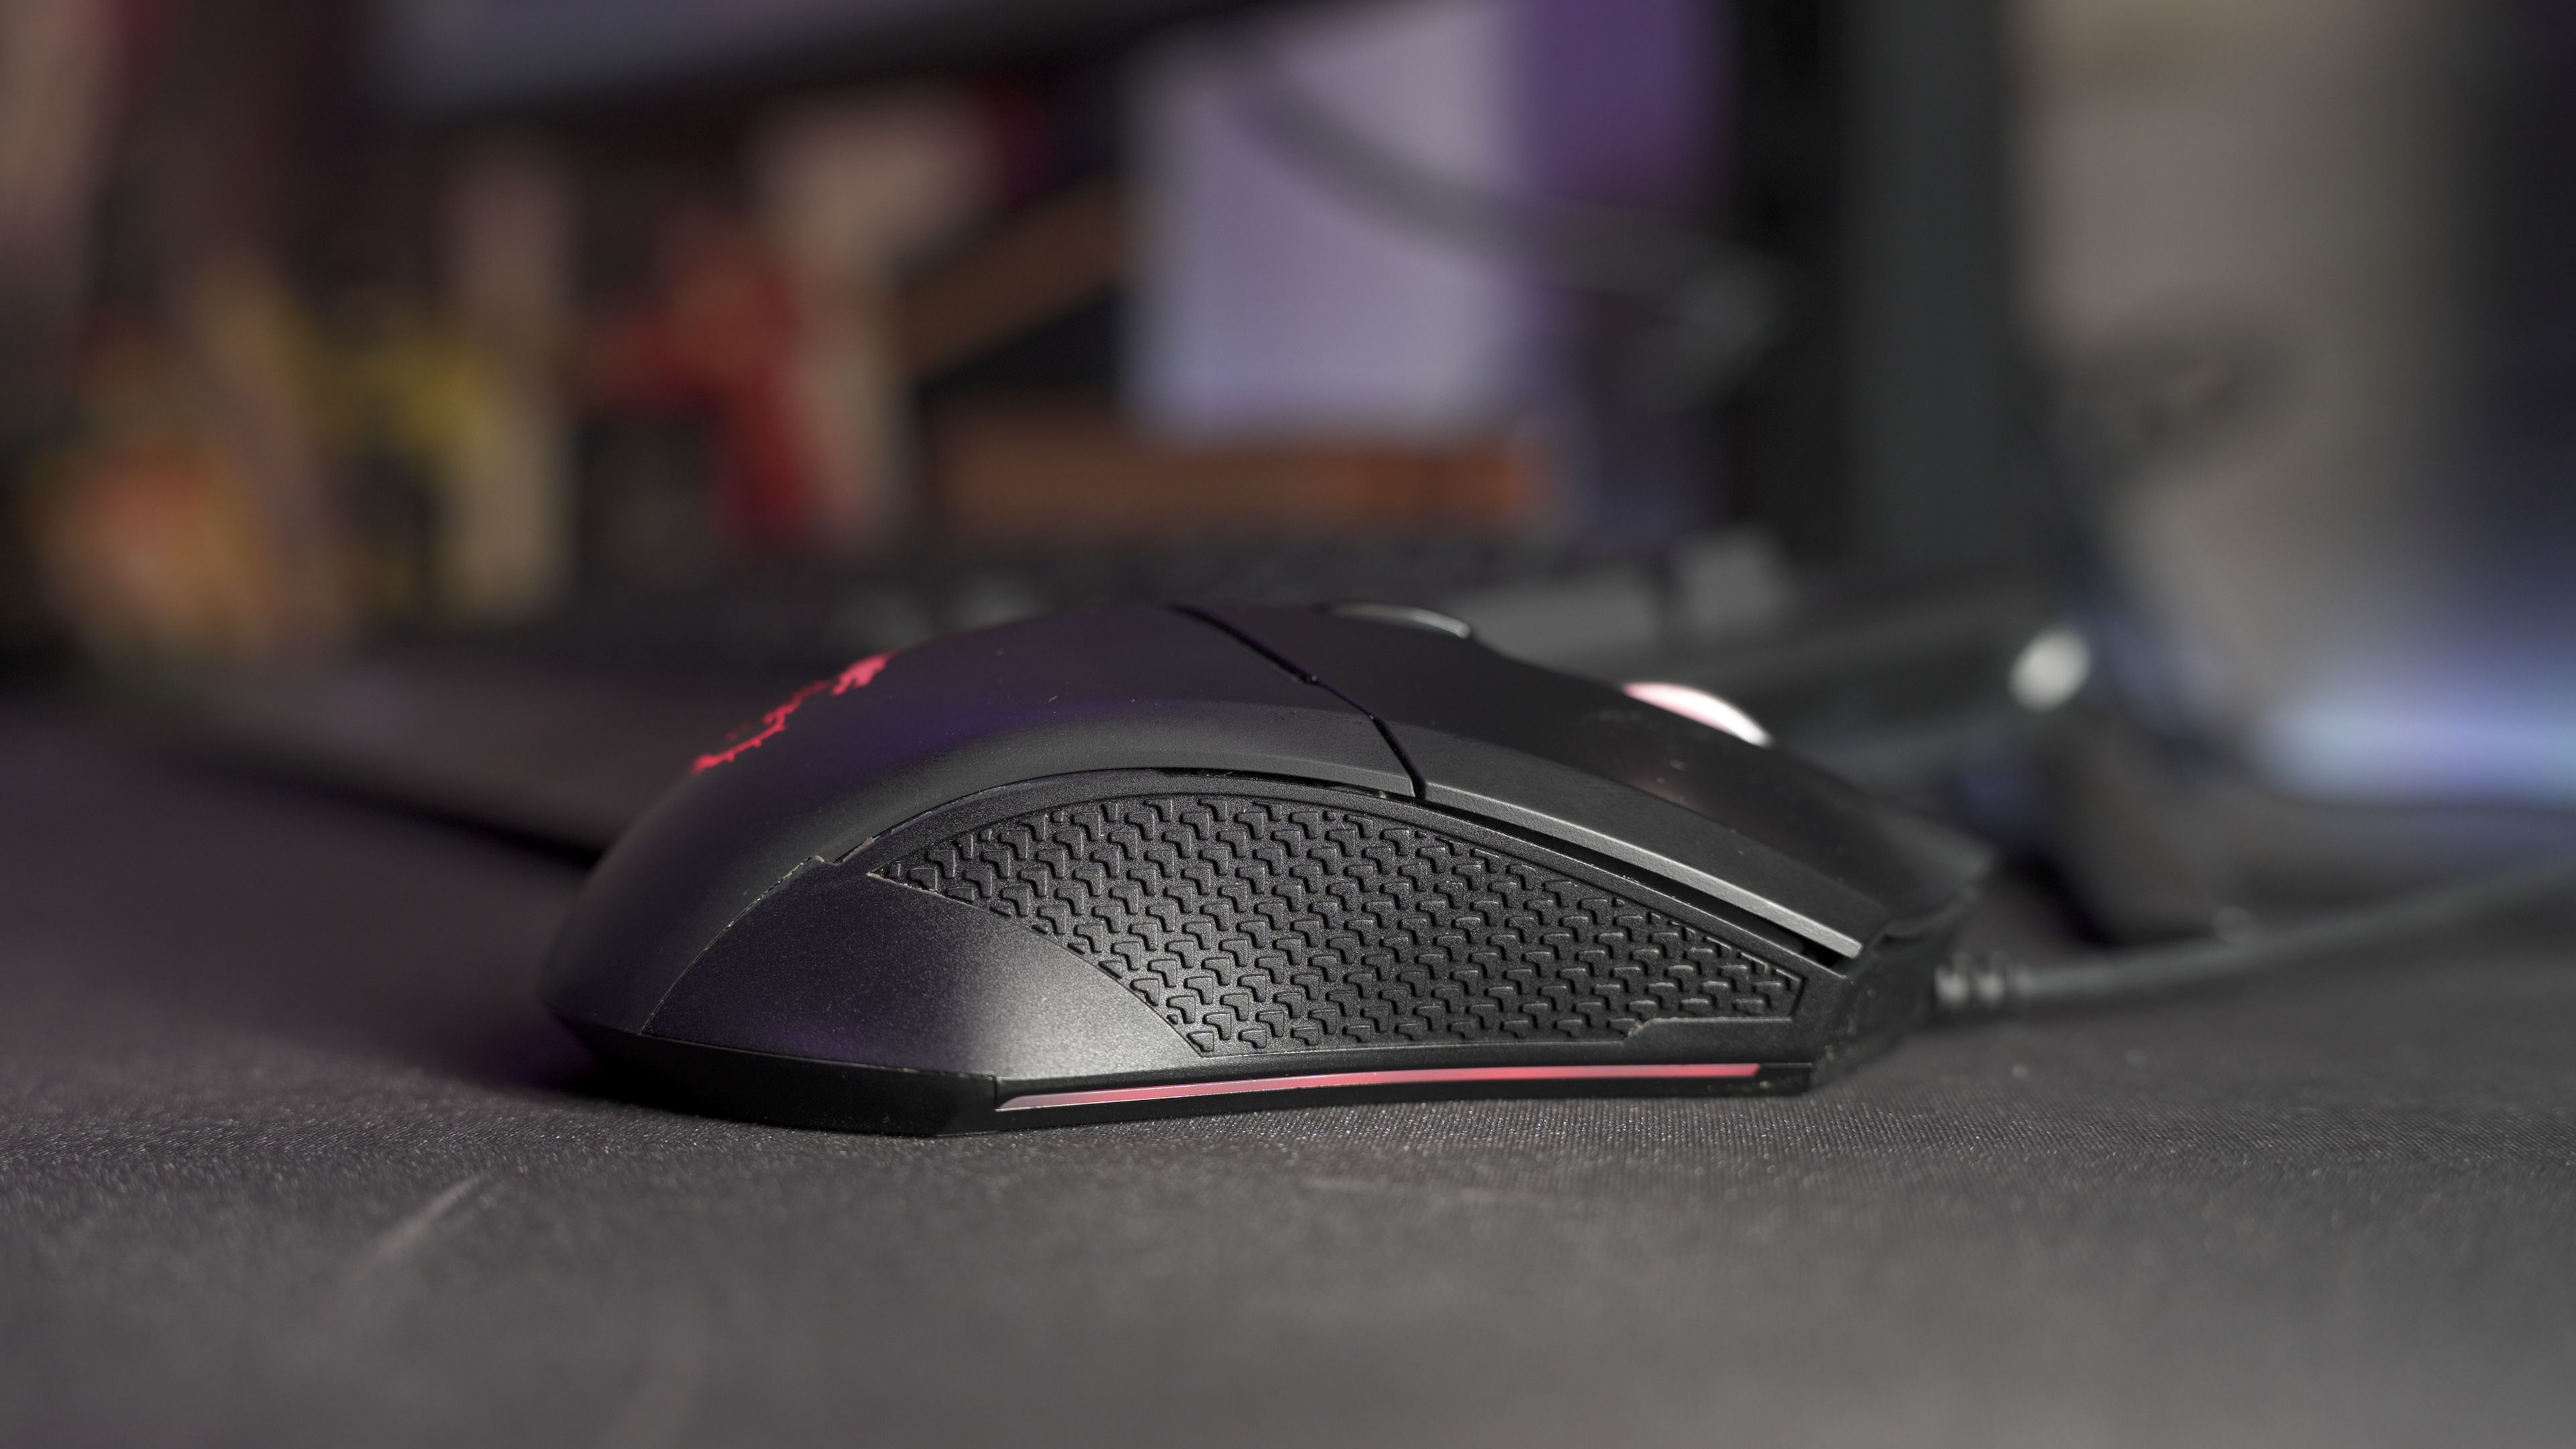 MSI Aegis RS 12 - Included Gaming Mouse